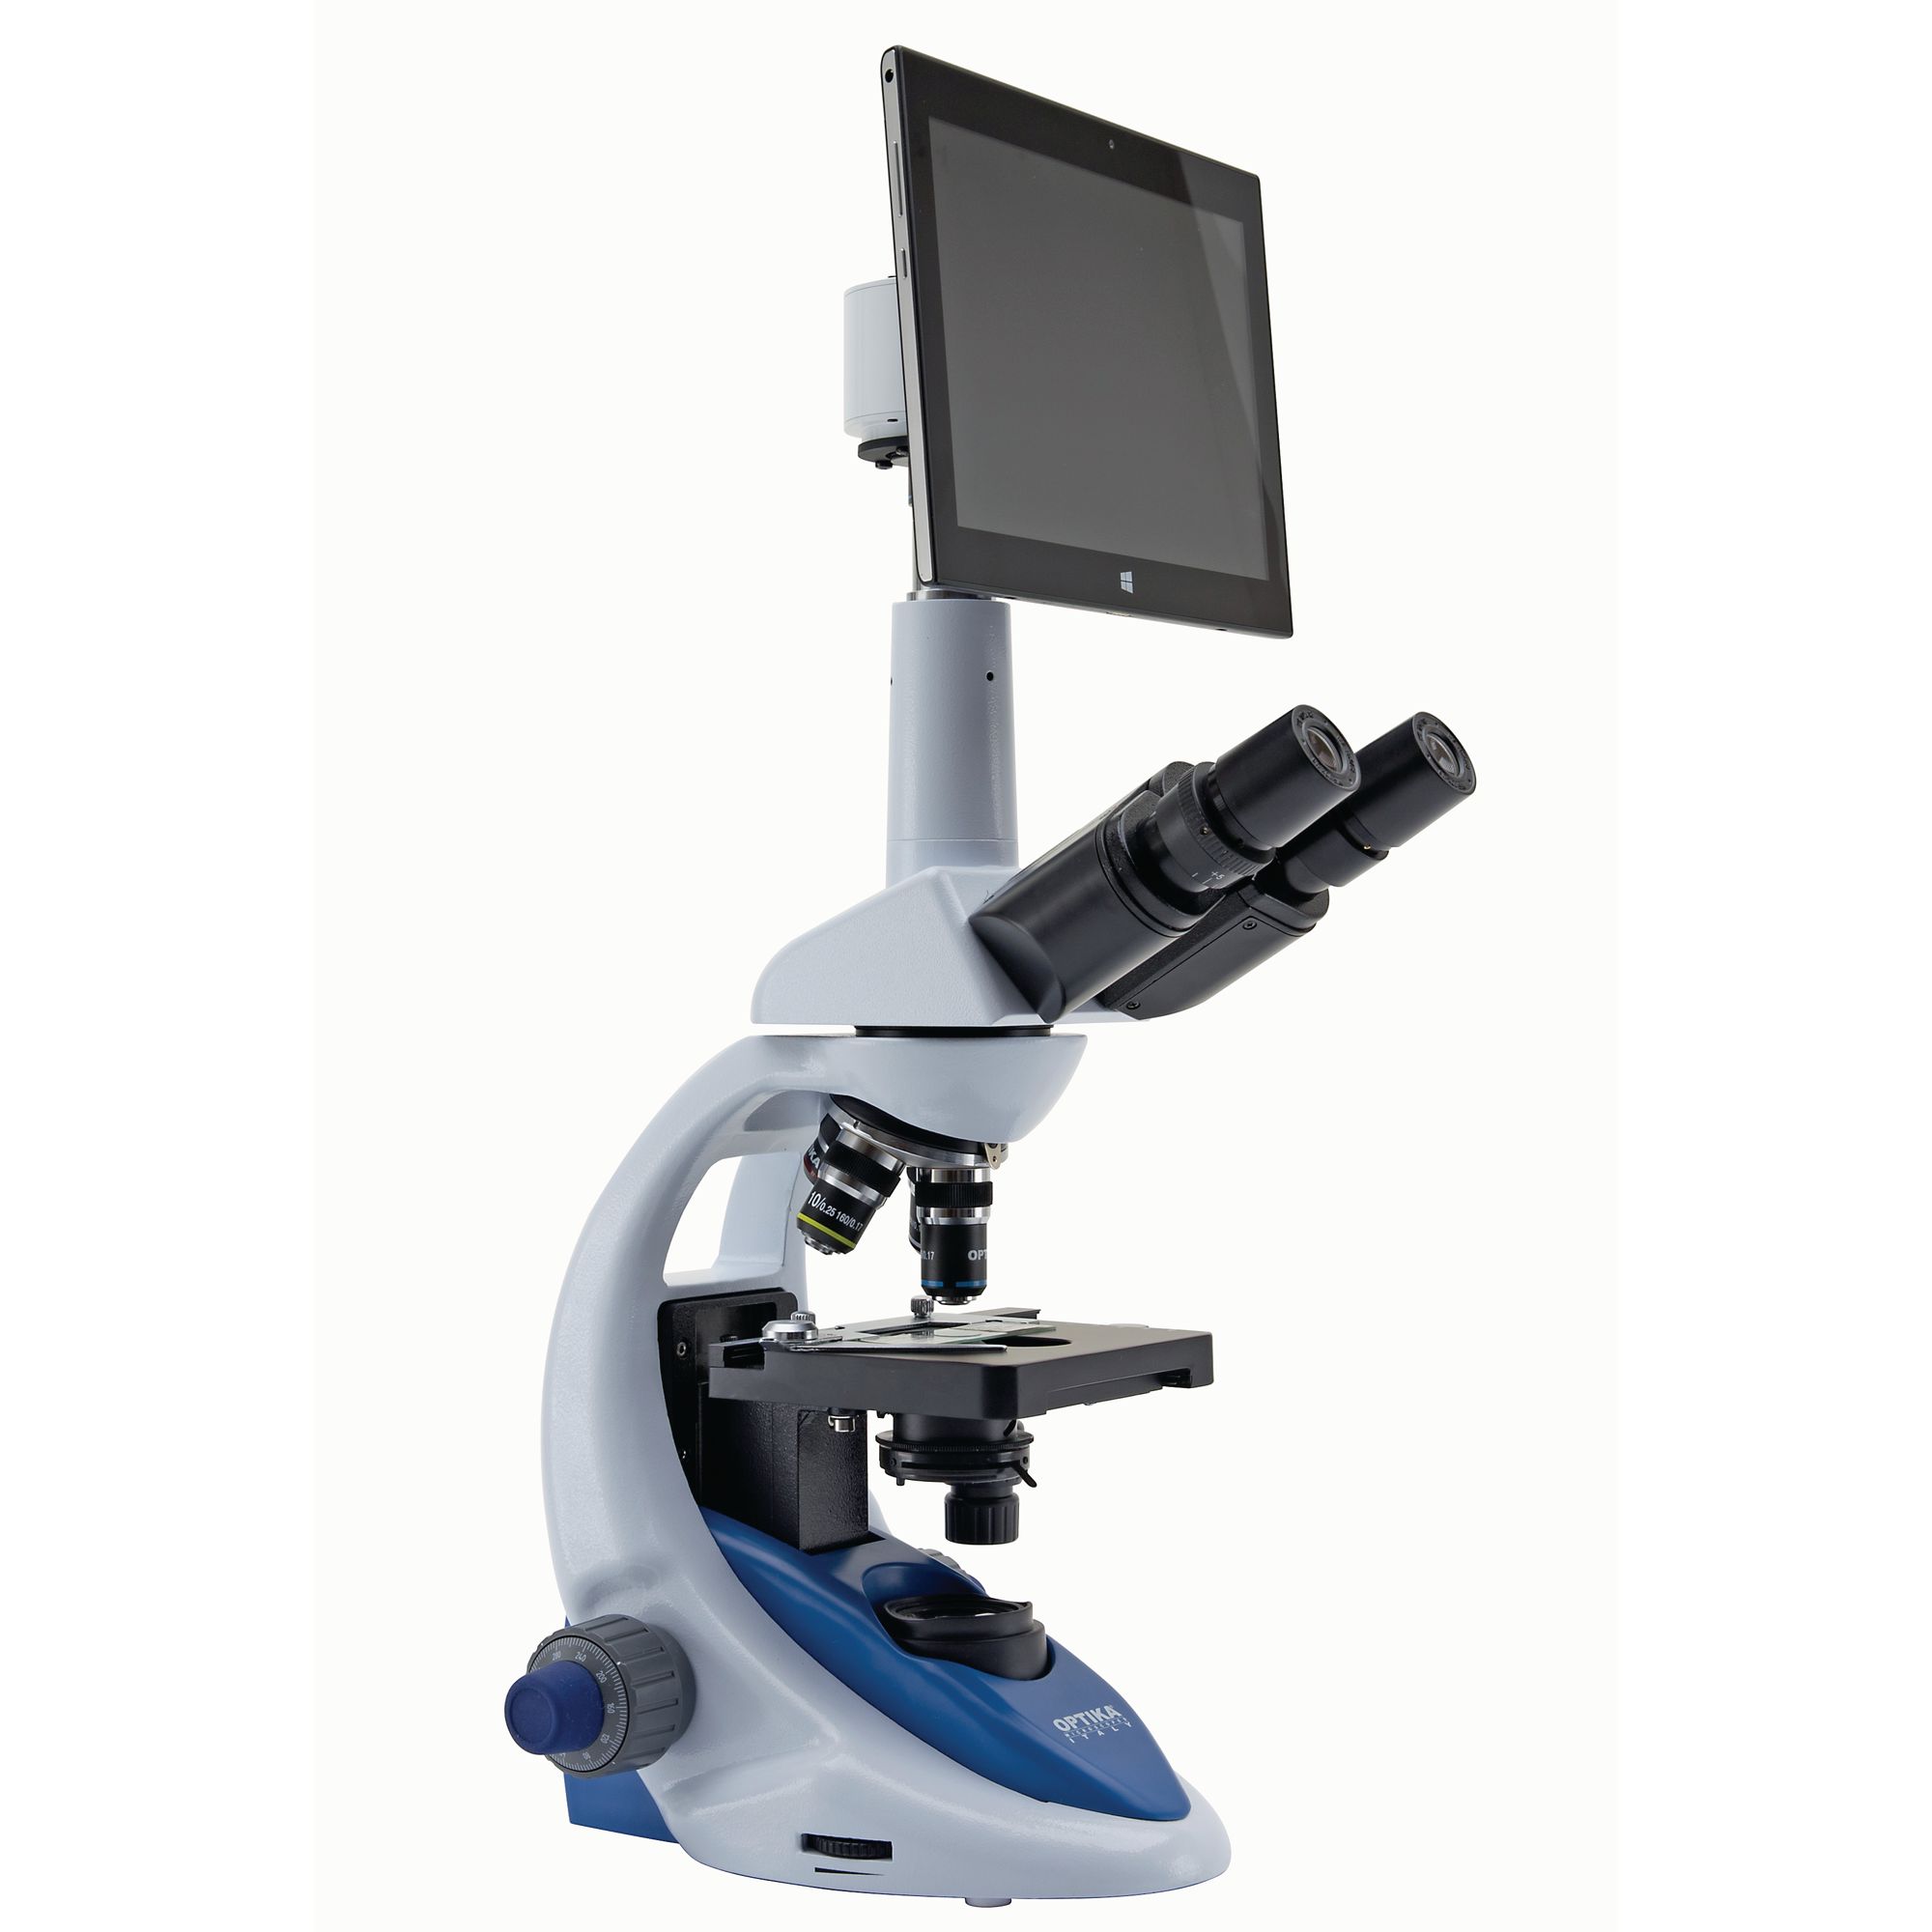 Tablet And Microscope Offer